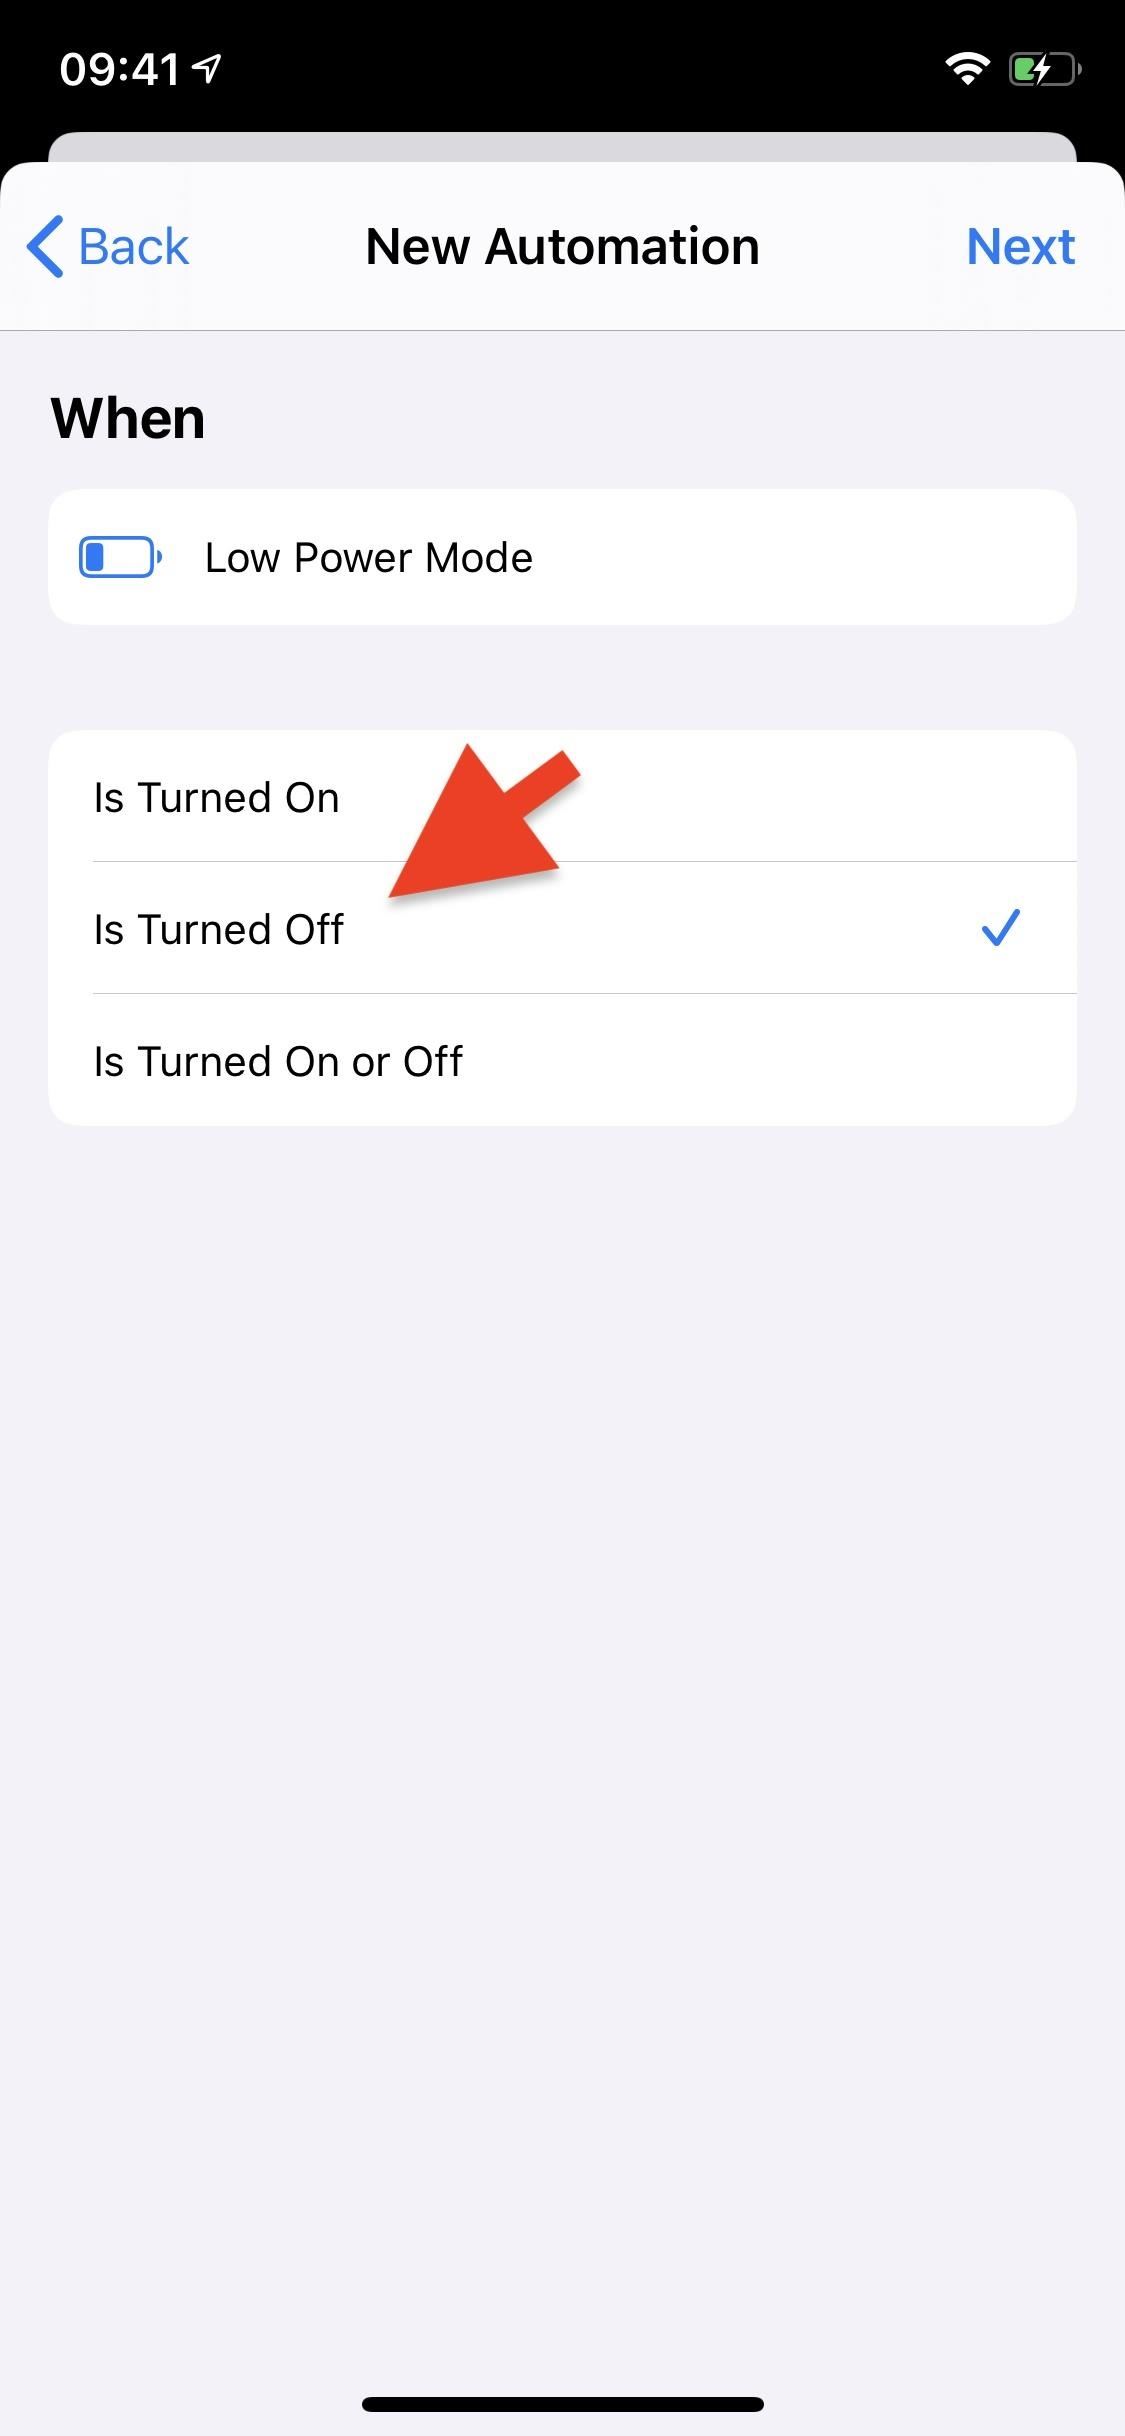 How to Keep Low Power Mode Enabled Indefinitely on Your iPhone